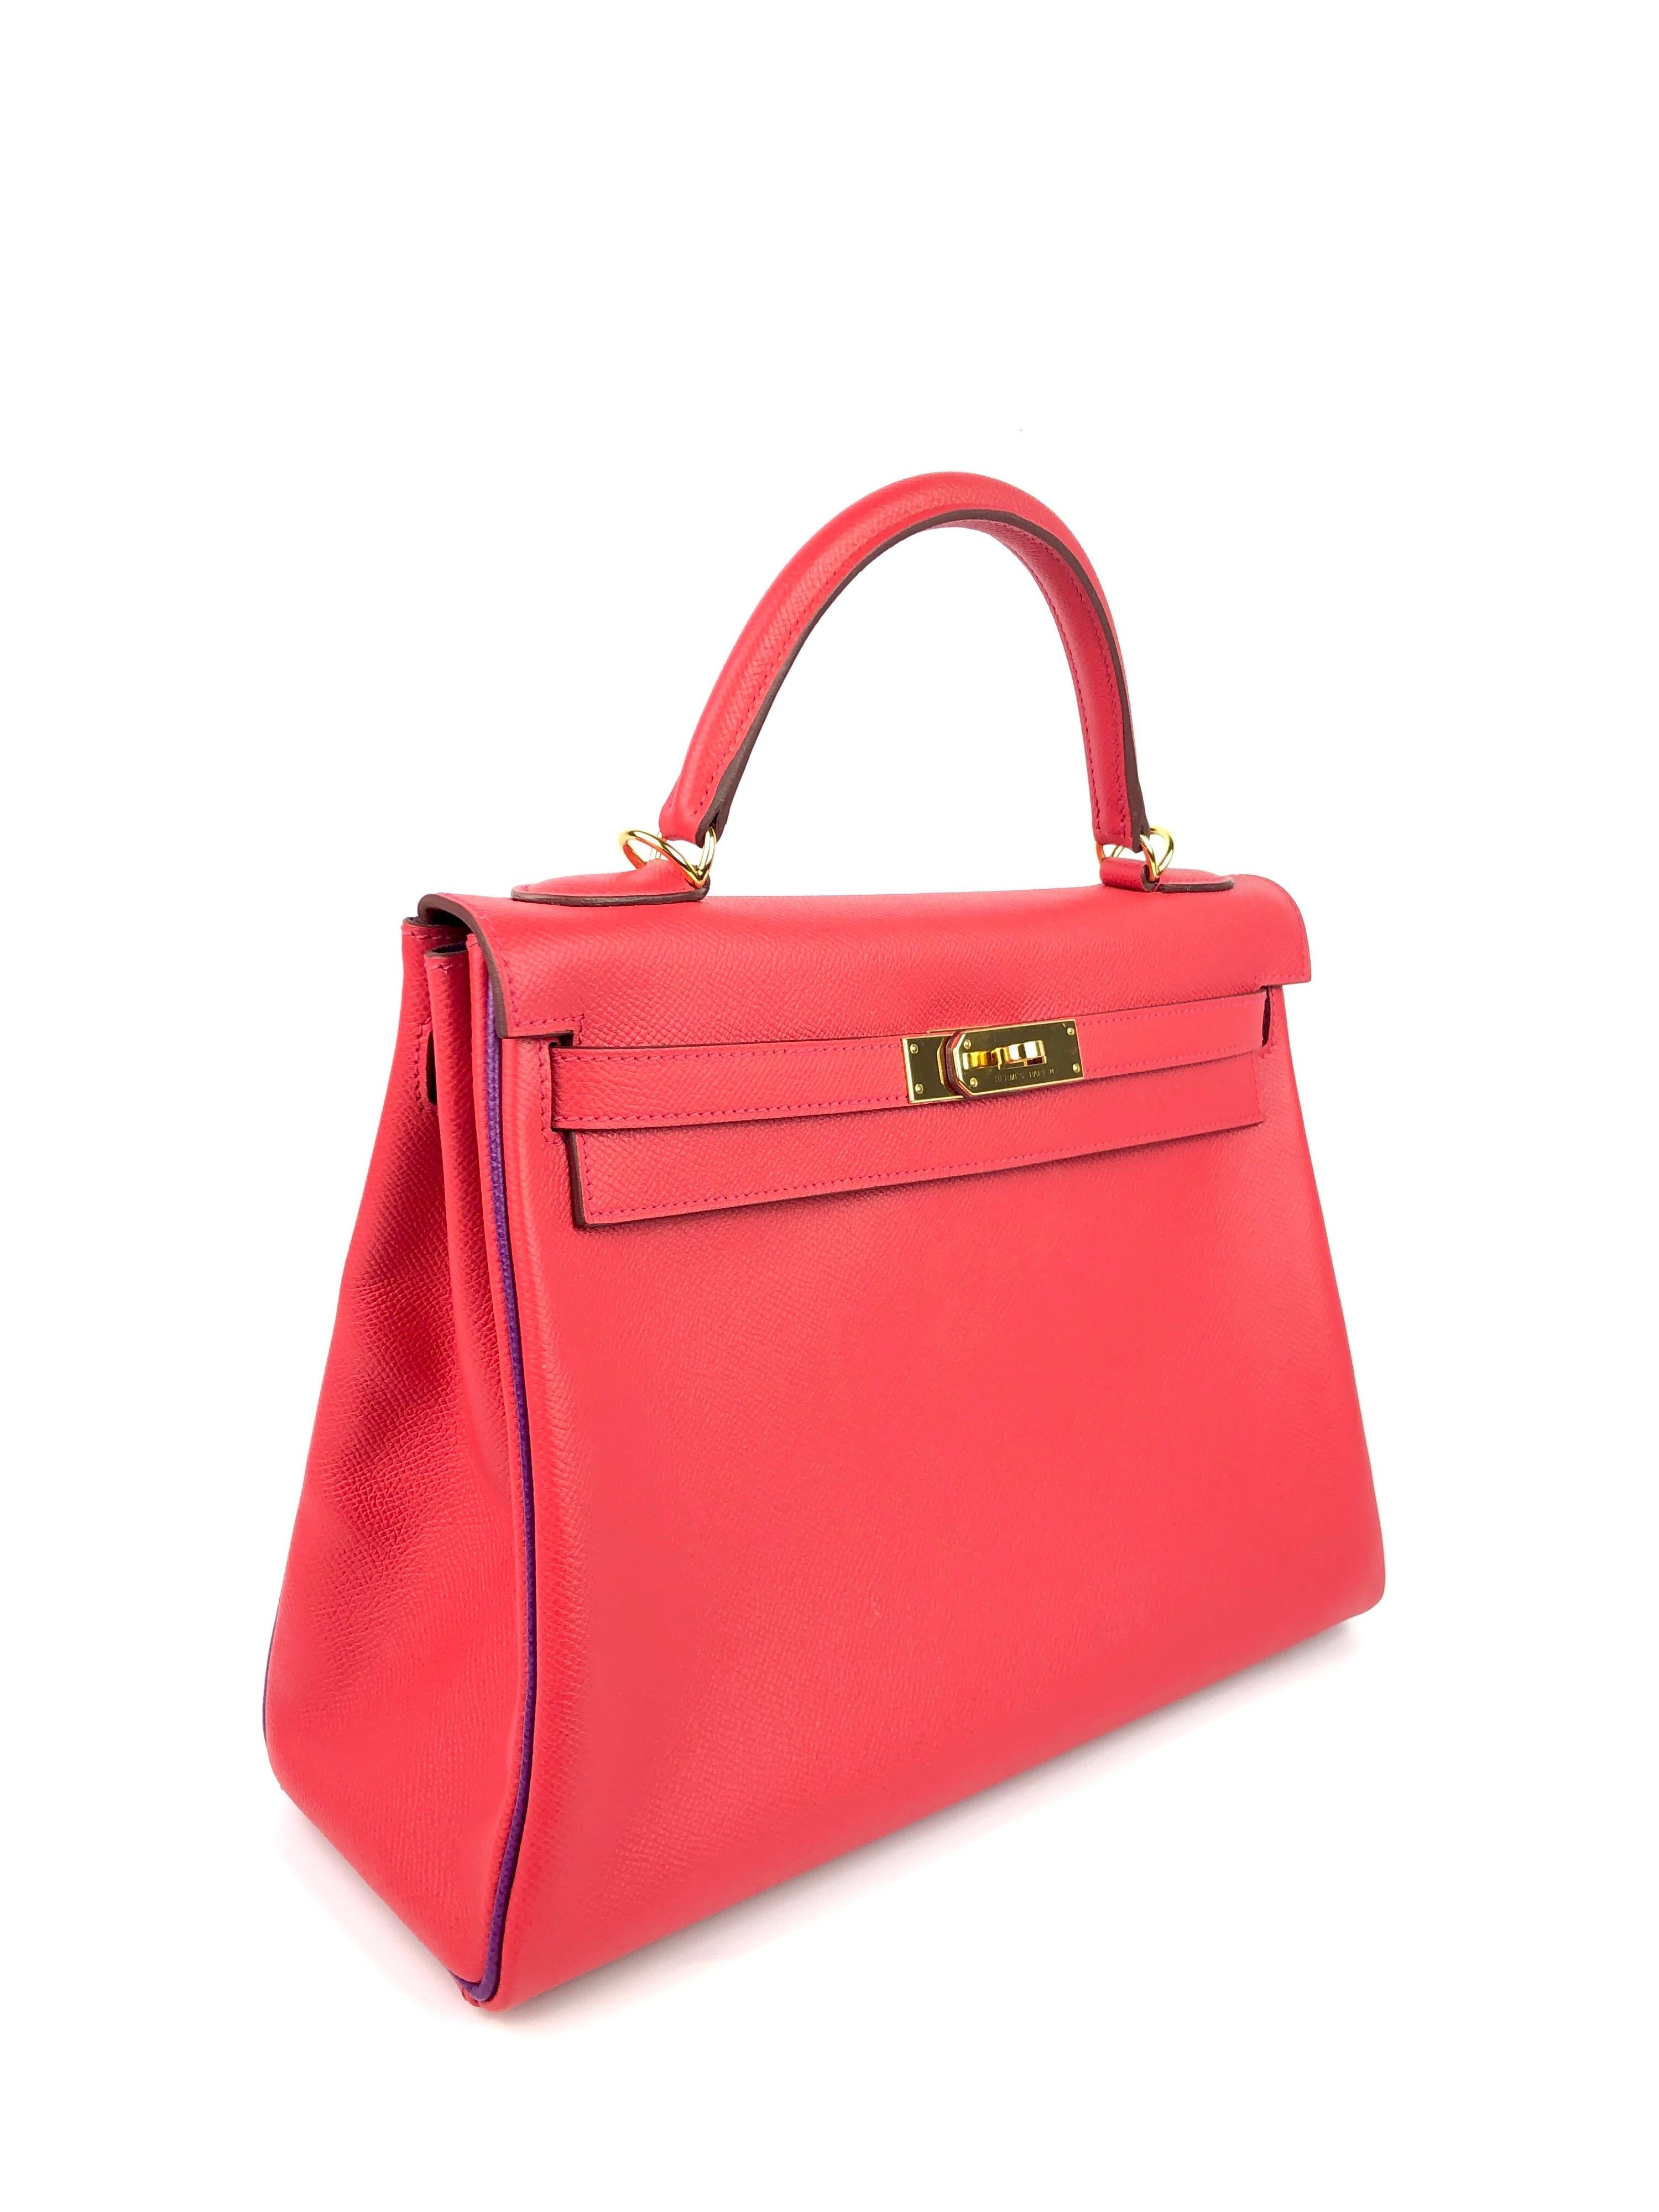 Hermes Kelly 32 HSS Special Order Rouge Pivoine Red Anemone Purple Piping and Interior Epsom Leather & Gold Hardware. 2016 X Stamp. Excellent Pristine Condition, light hairlines on Hardware, Excellent corners and structure.

Shop with Confidence